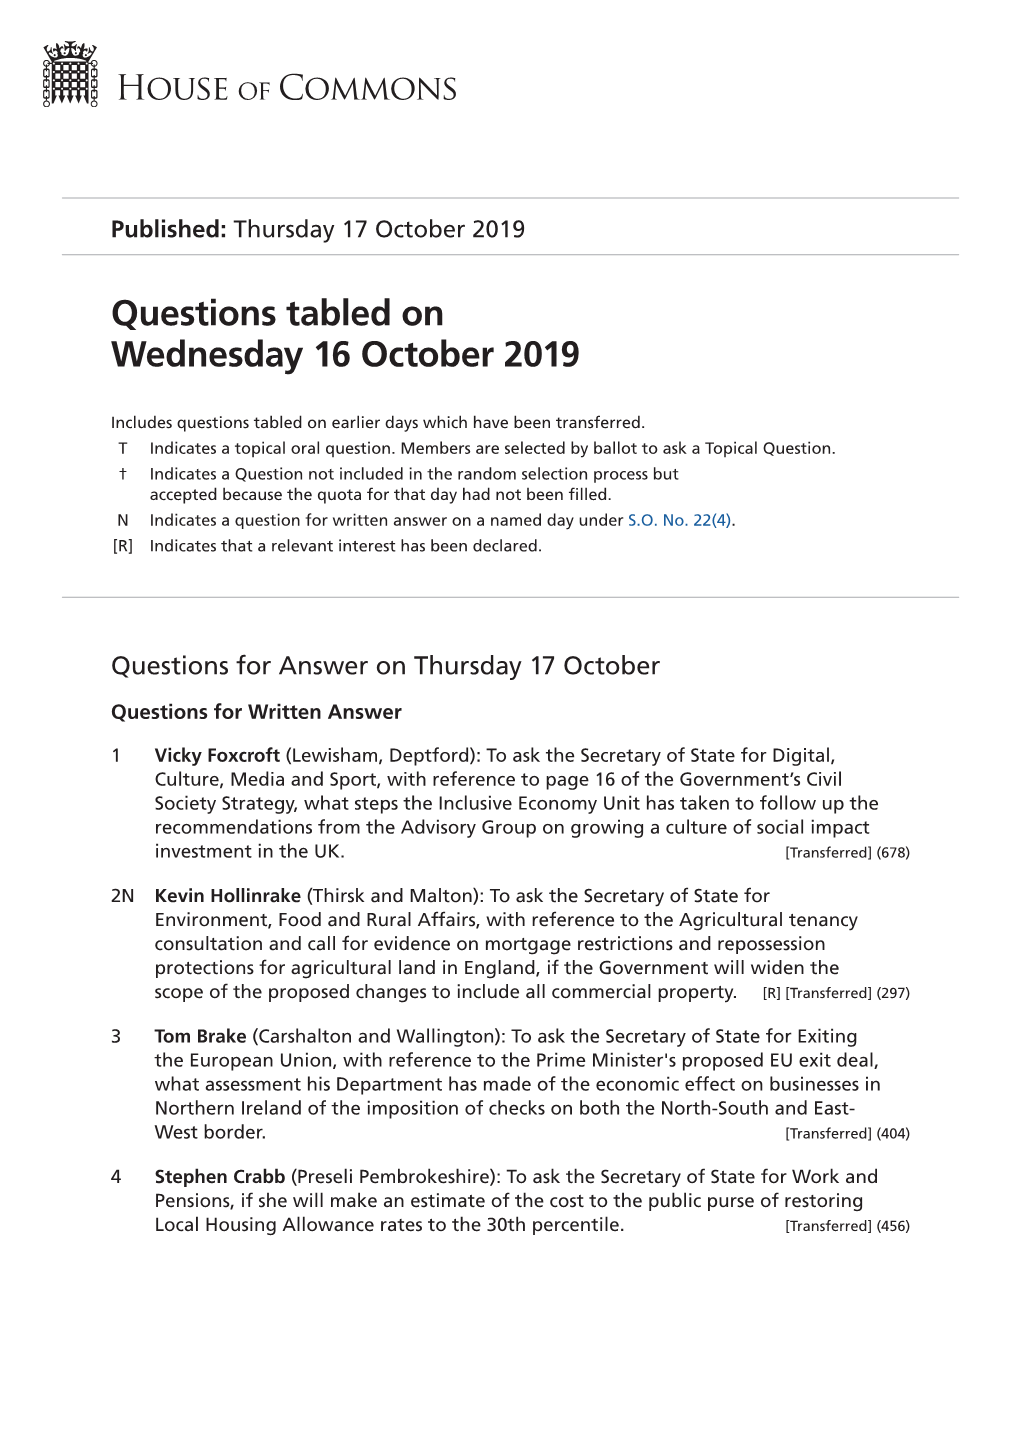 Questions Tabled on Wed 16 Oct 2019